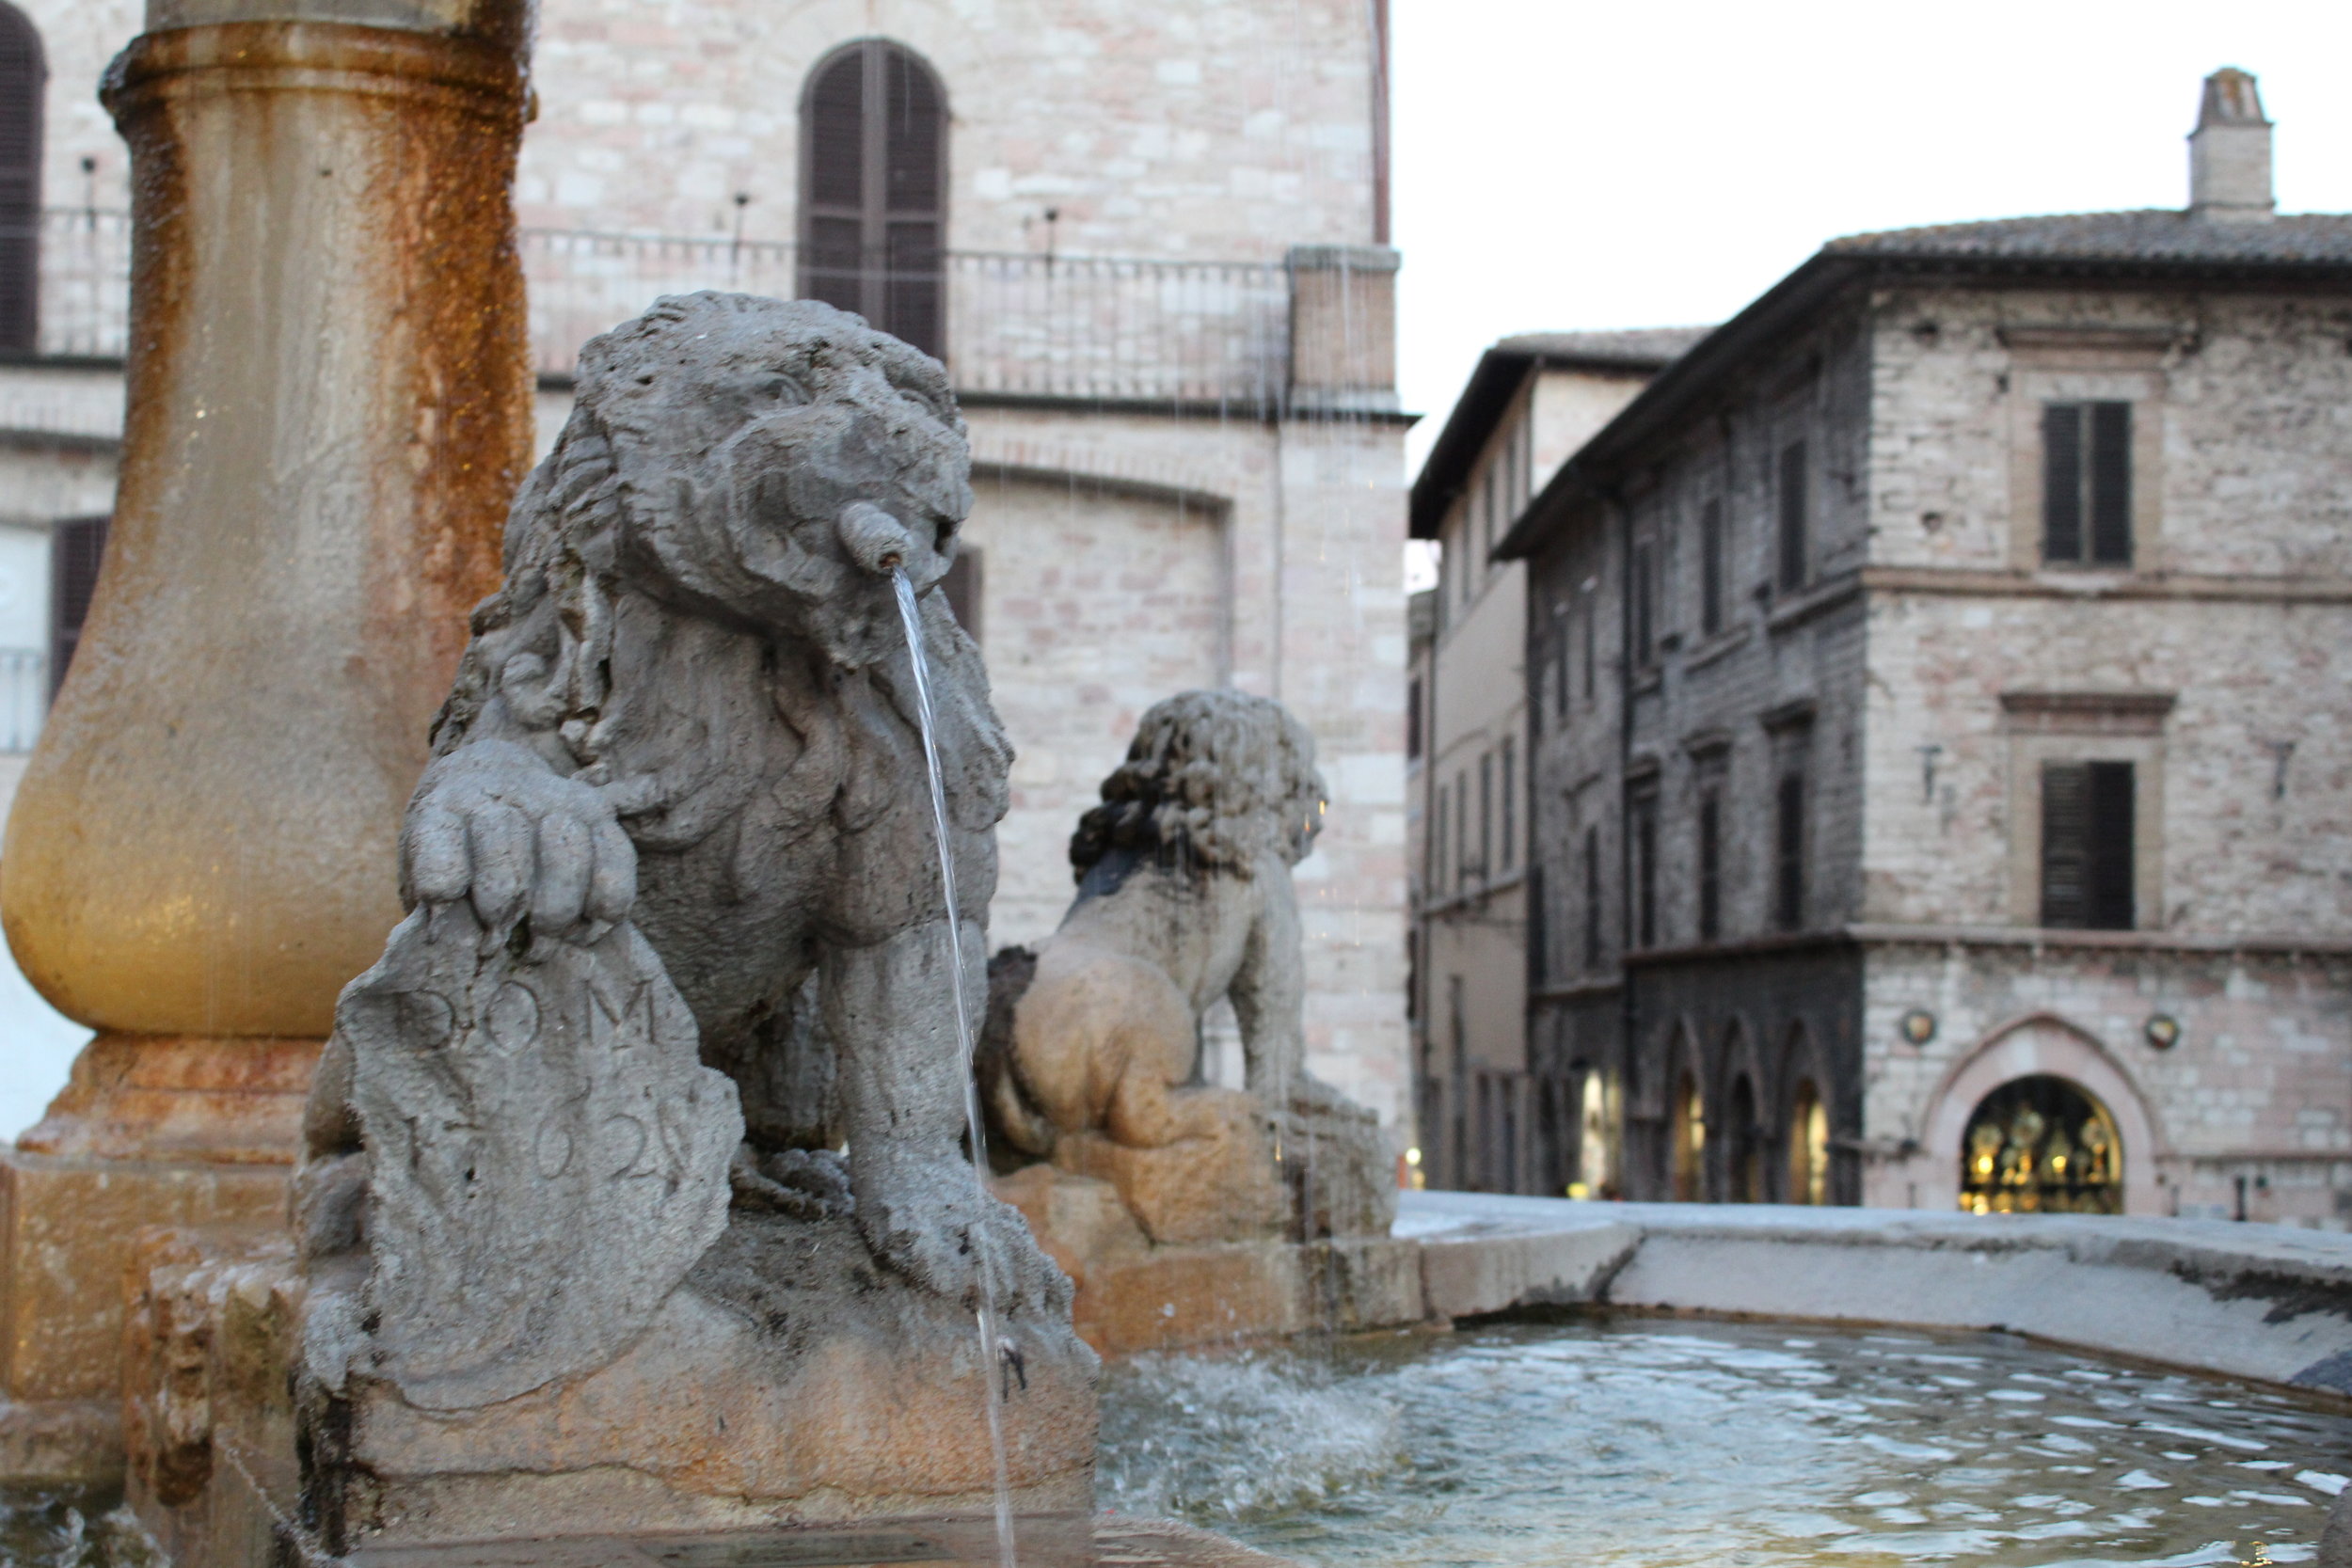 Fountain in the Assisi Piazza